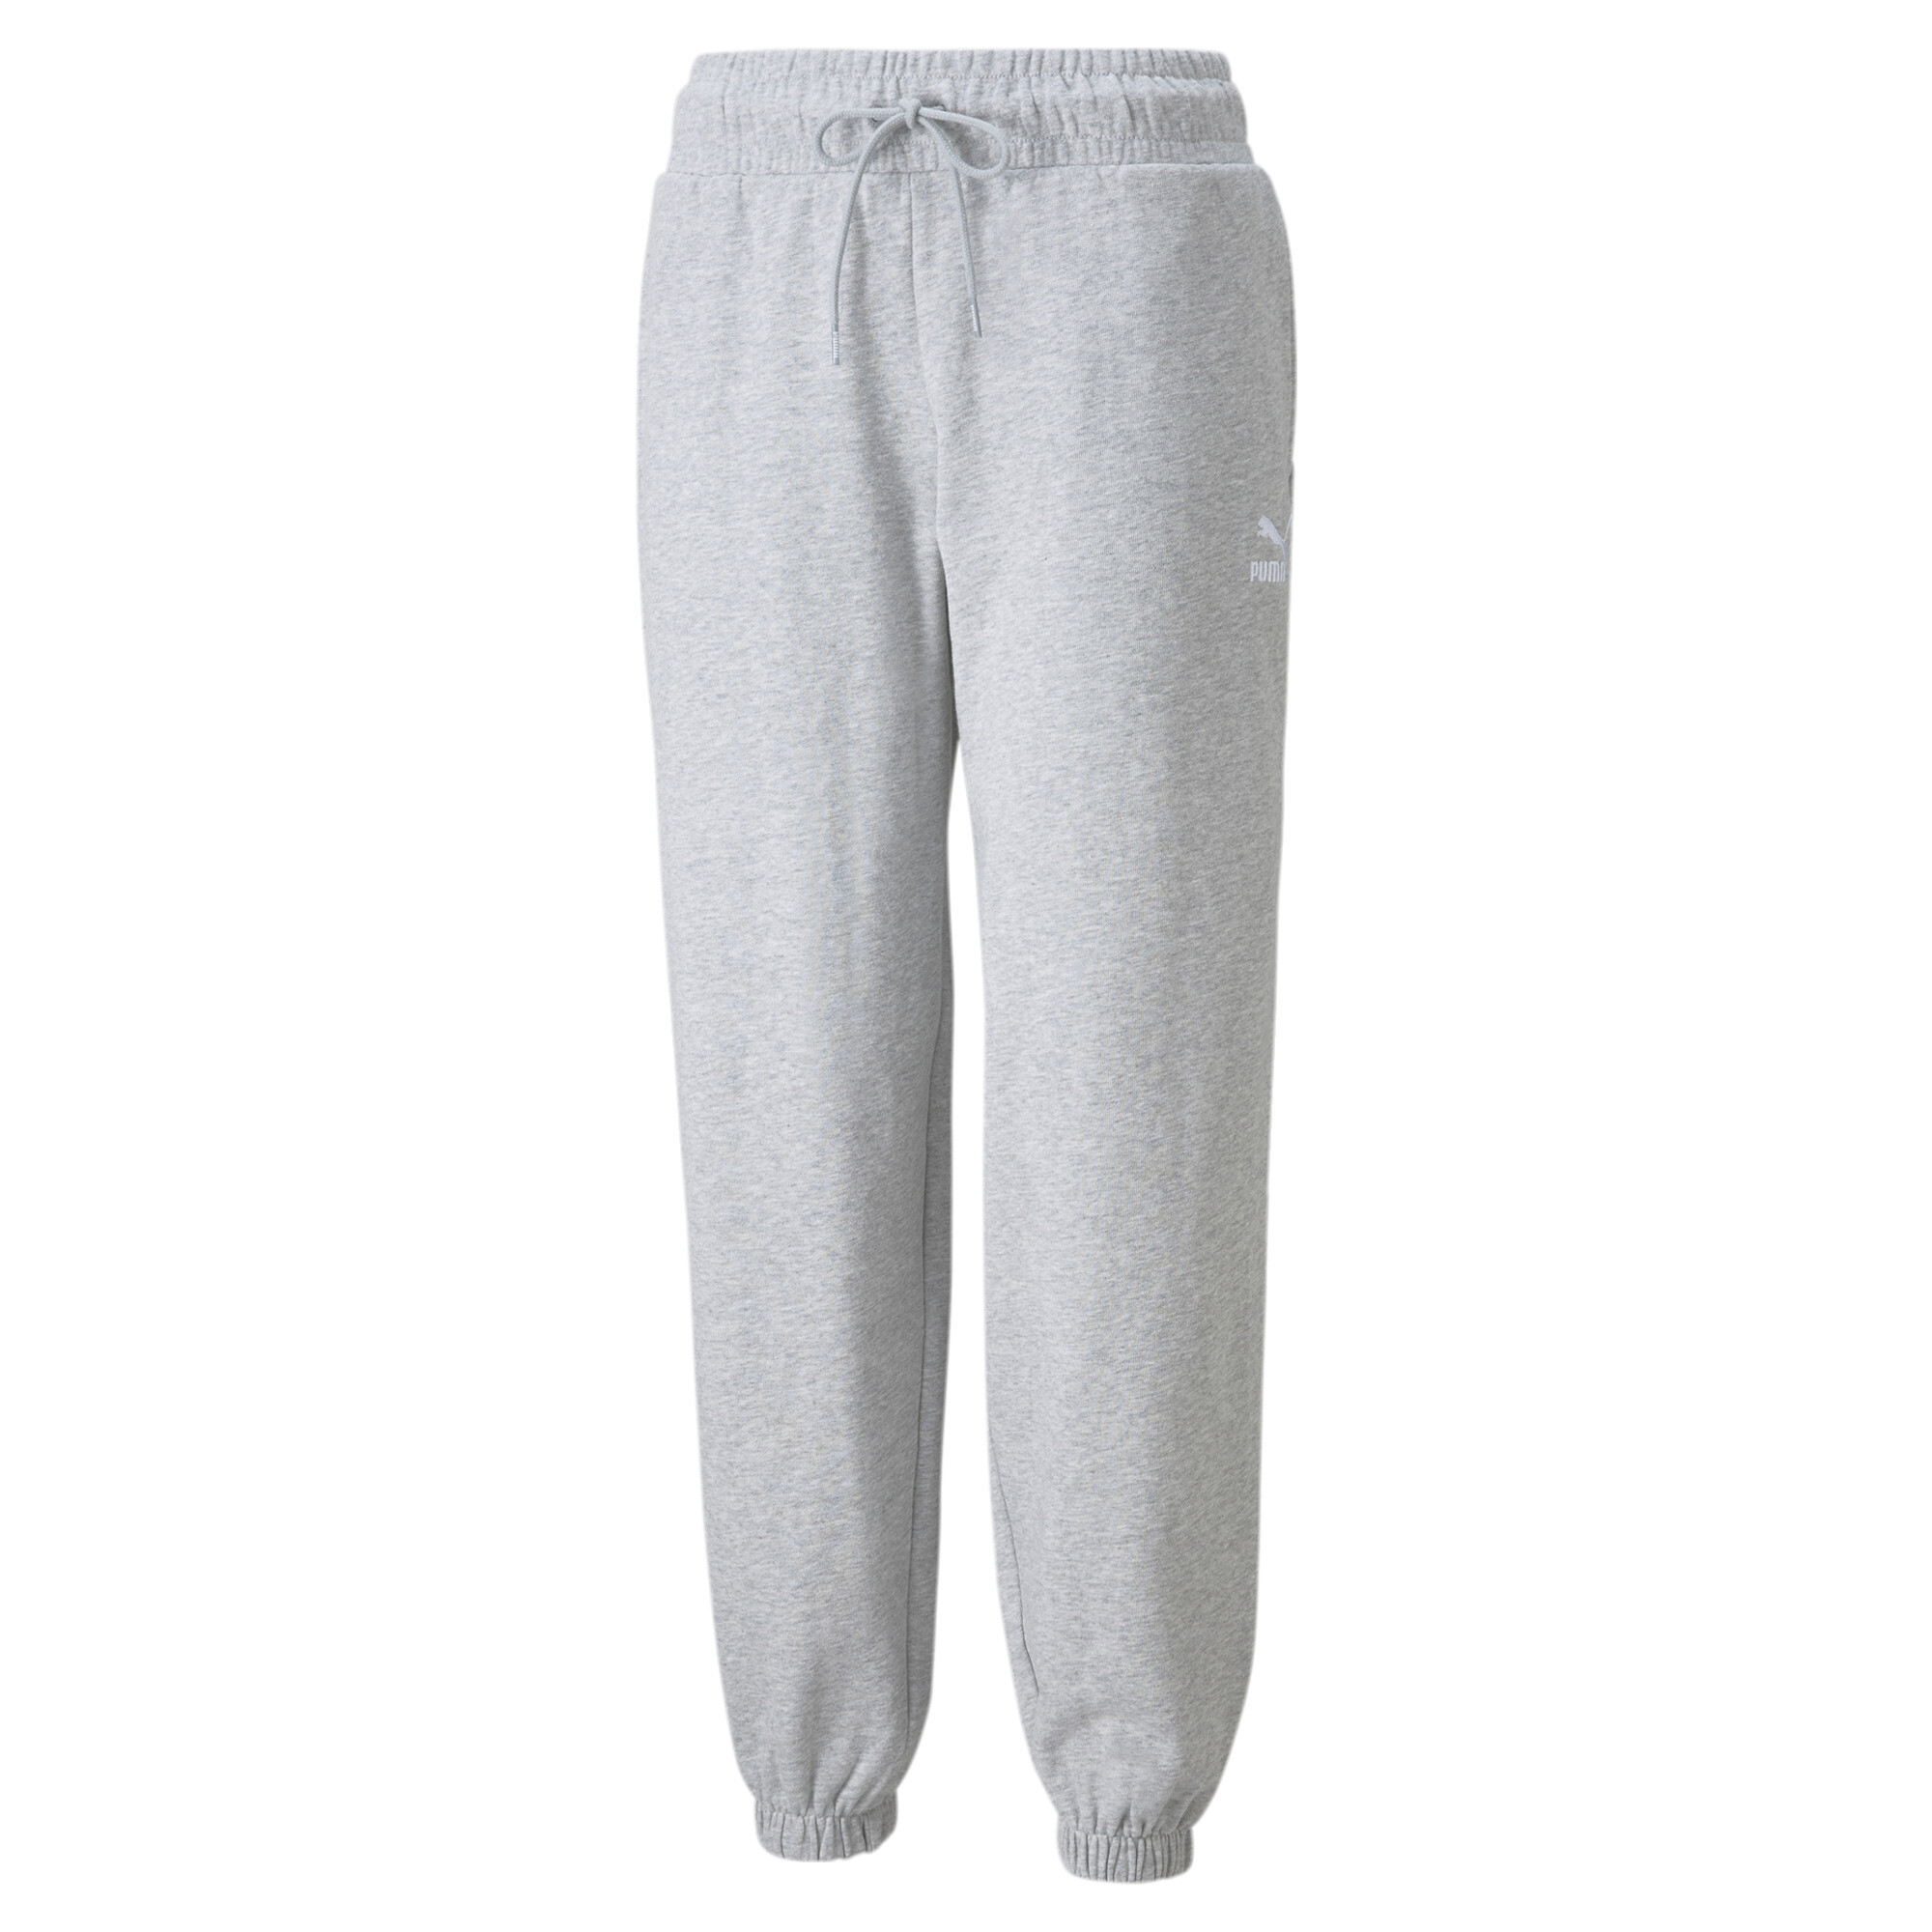 Women's Puma Classics PLUS Relaxed's Joggers, Gray, Size 1X, Clothing